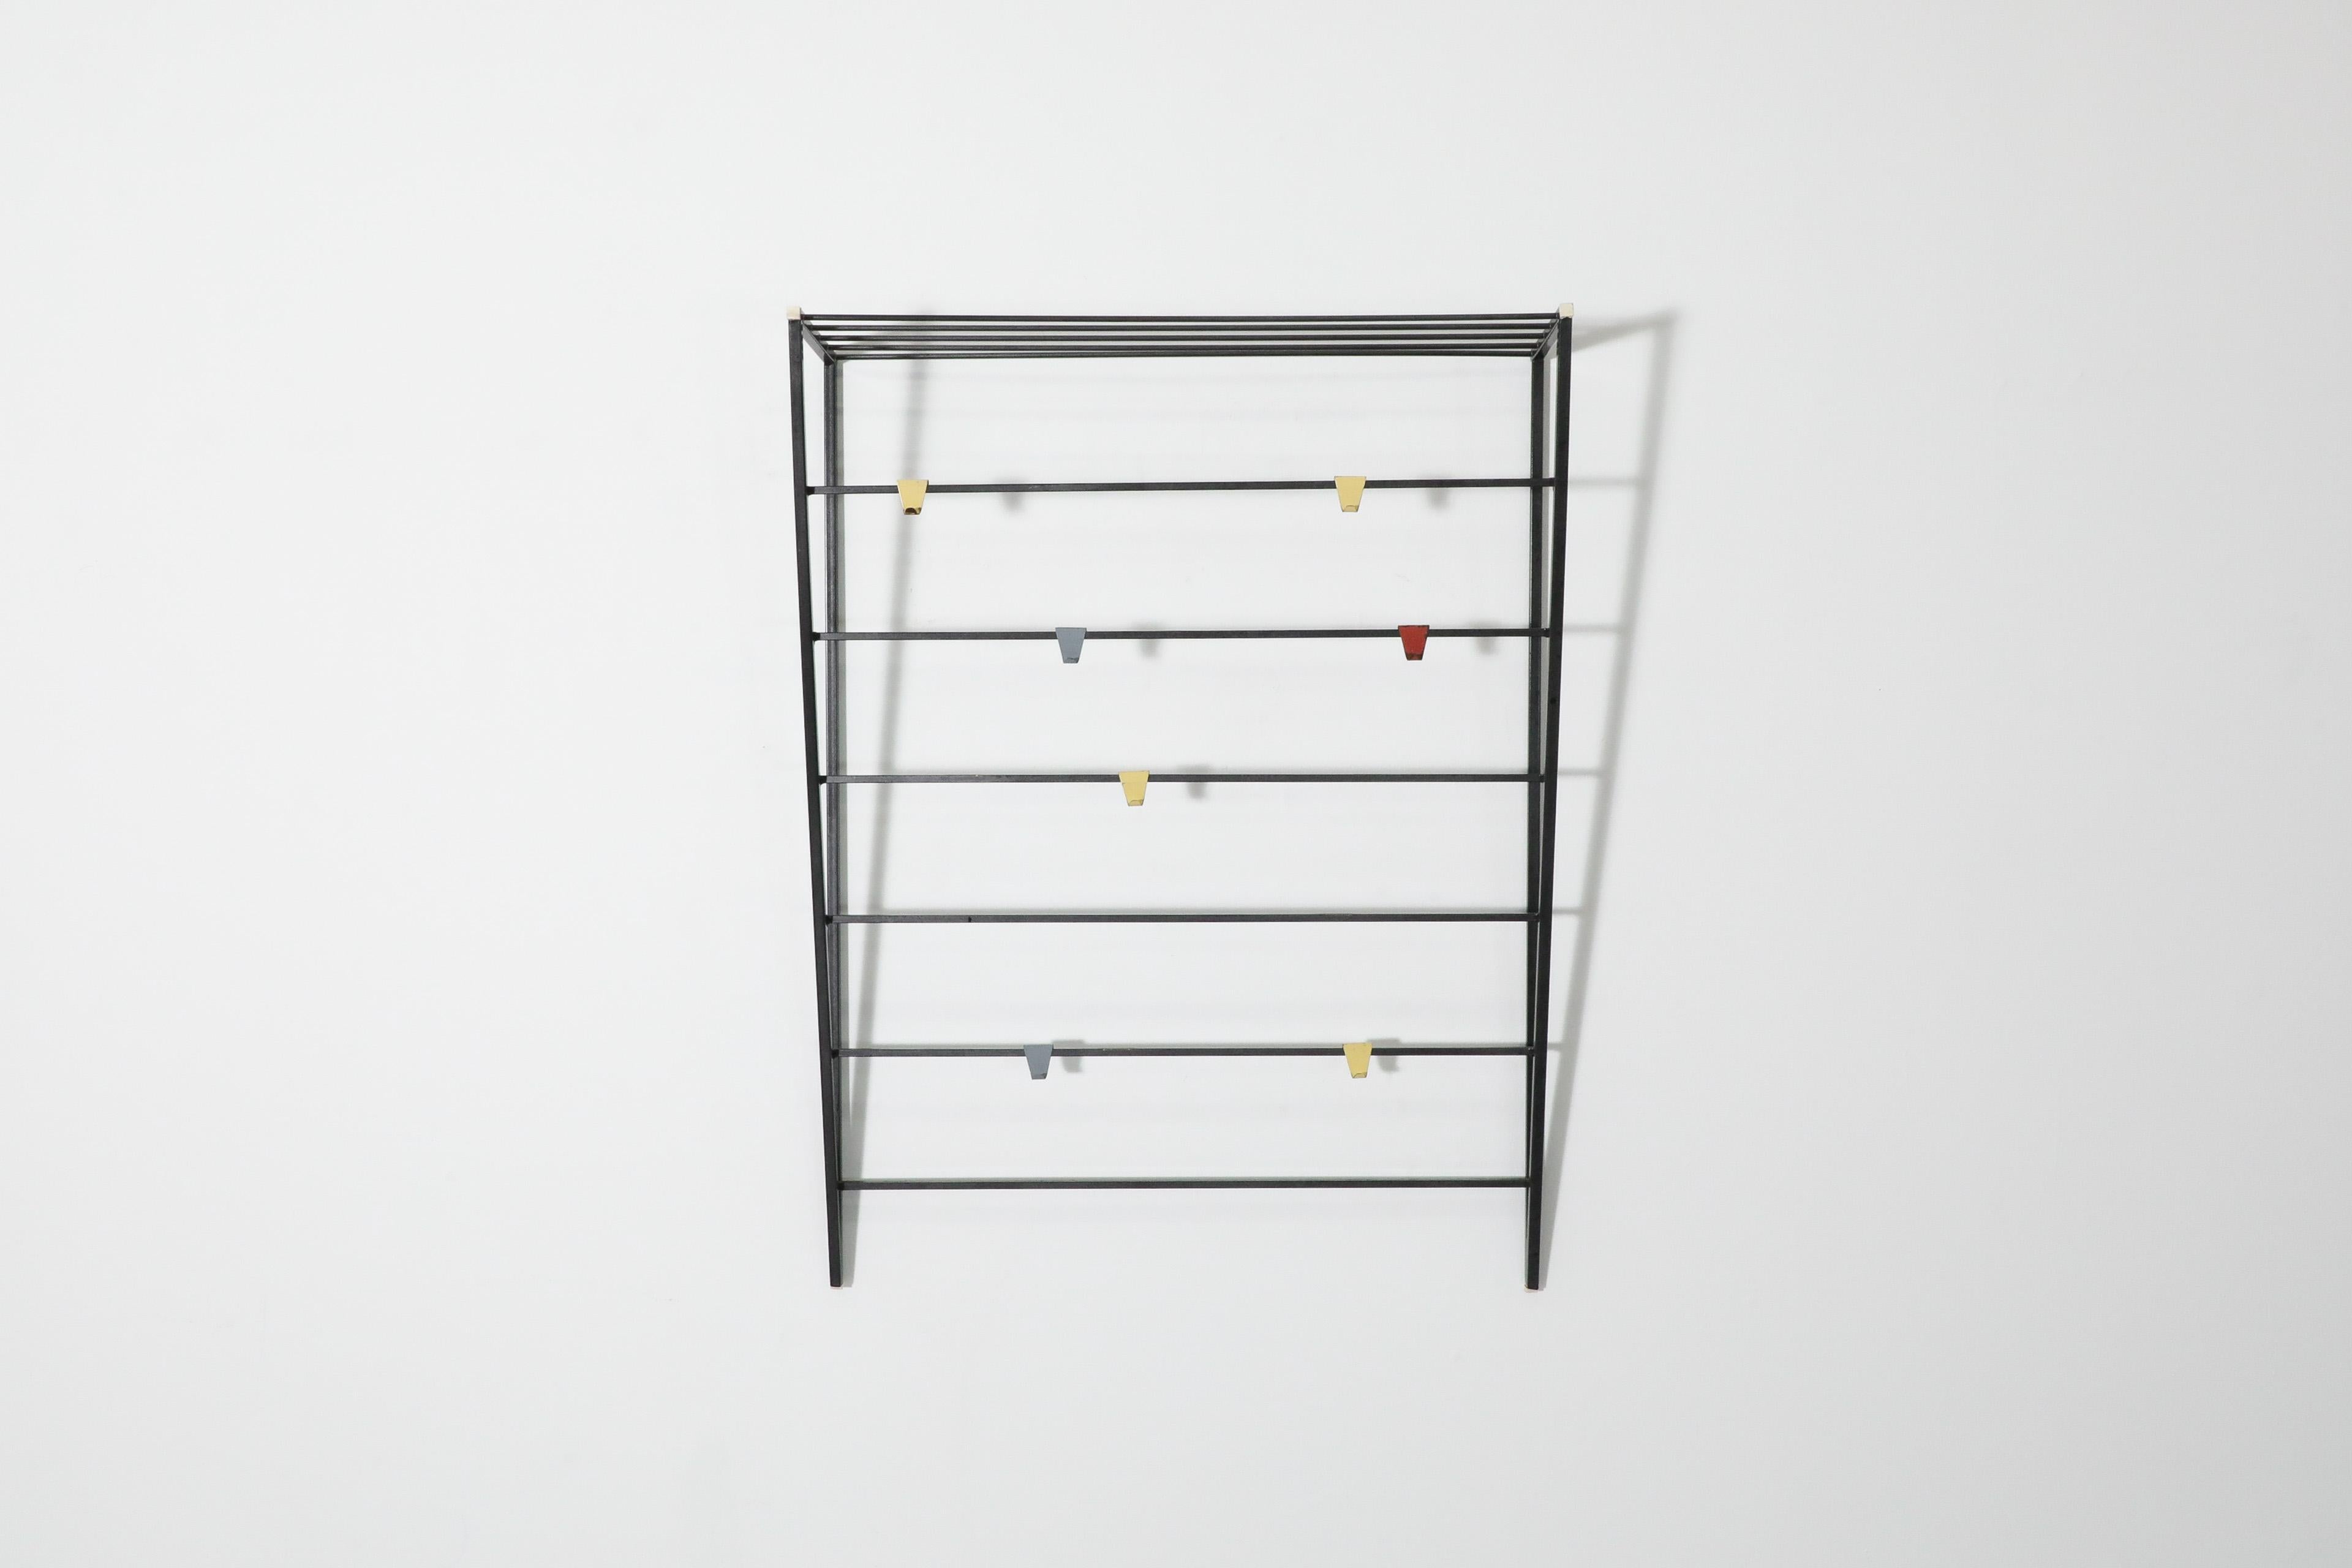 Triangular wall mount coat rack with multi-colored hooks by Coen de Vries for Pilastro. A functional black enameled metal wall mount rack with adjustable hooks and hat shelf. In original condition with visible signs of wear including enamel loss and